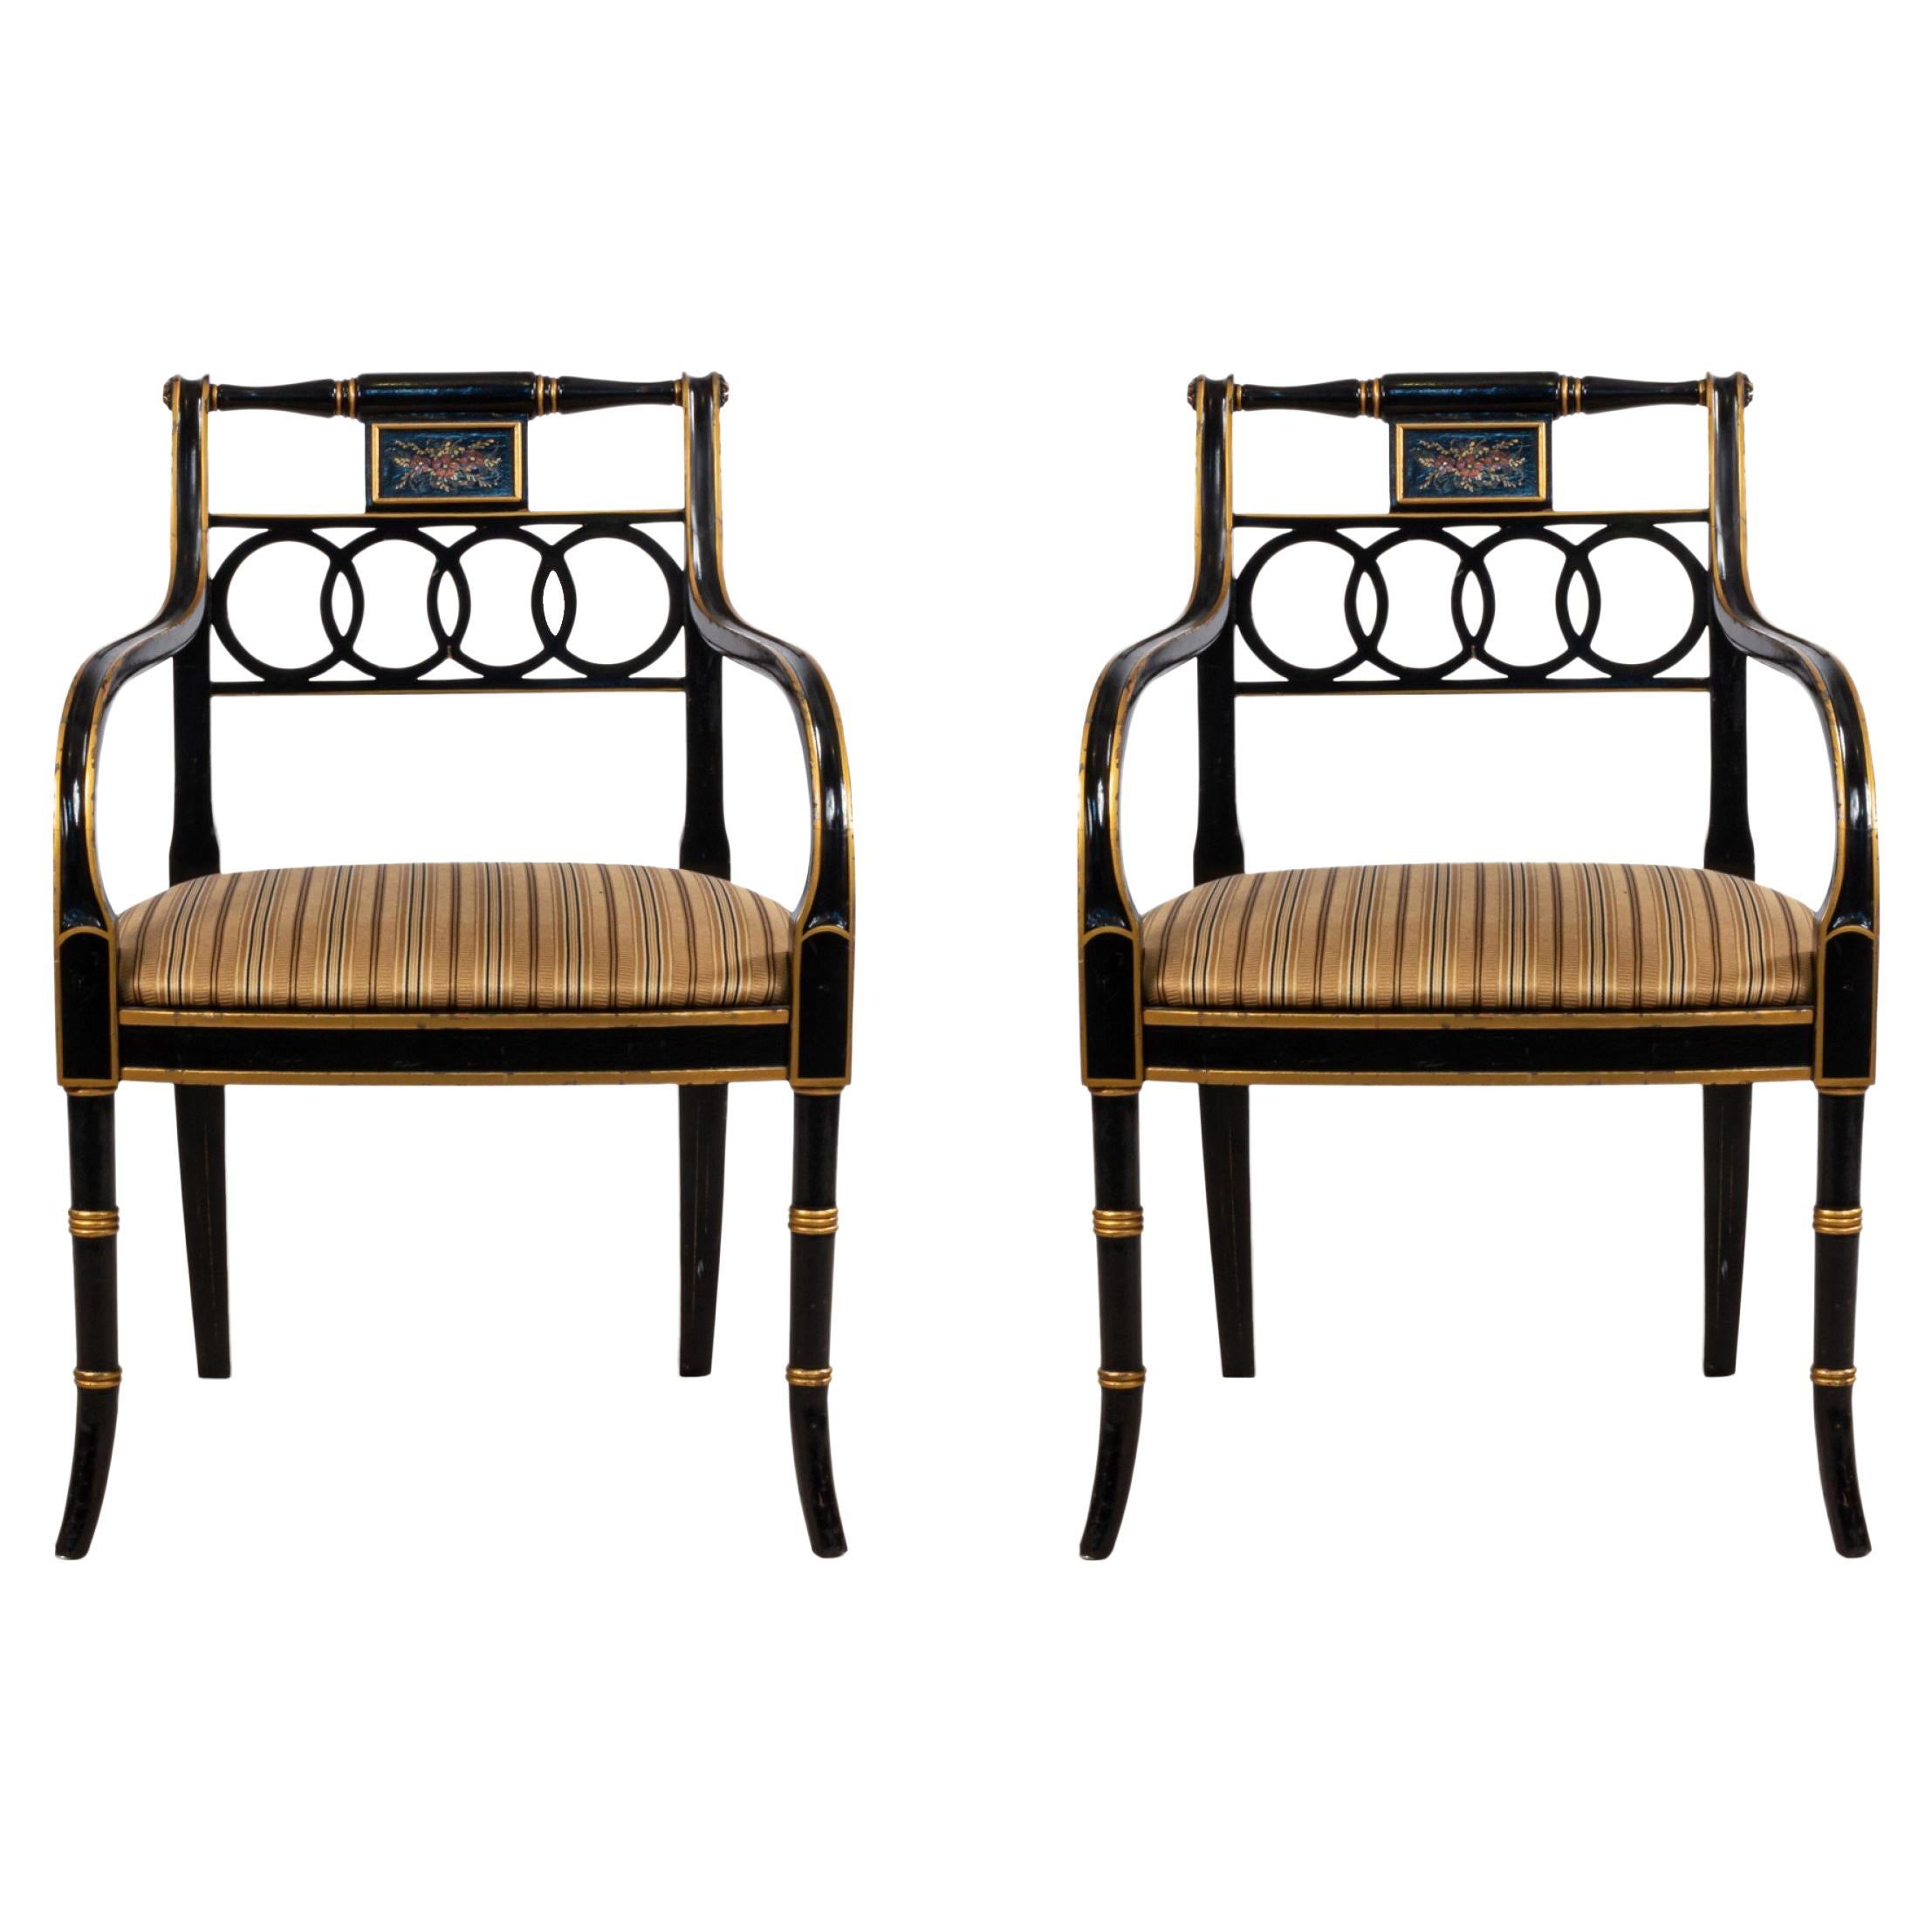 Regency Style Gilt Lacquer Ring Back Armchairs with Gold Seats